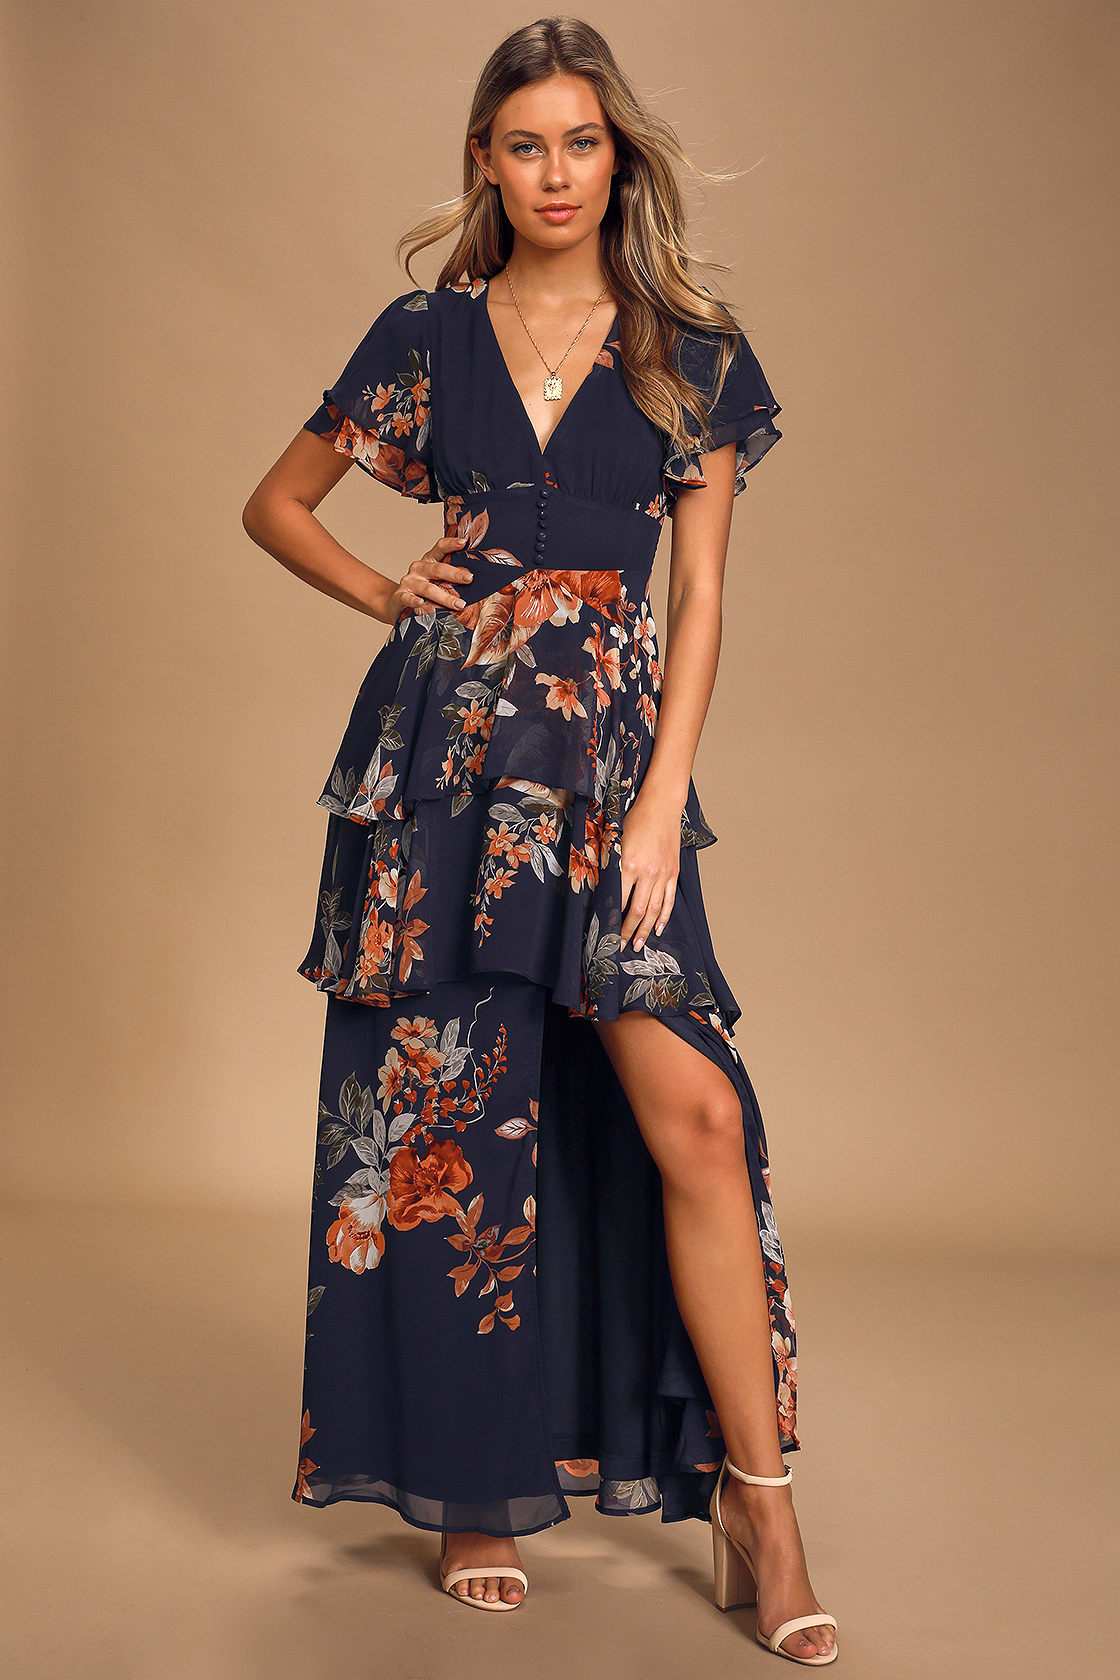 Navy Blue Floral Print Tiered Maxi Dress for Fall Wedding Guest